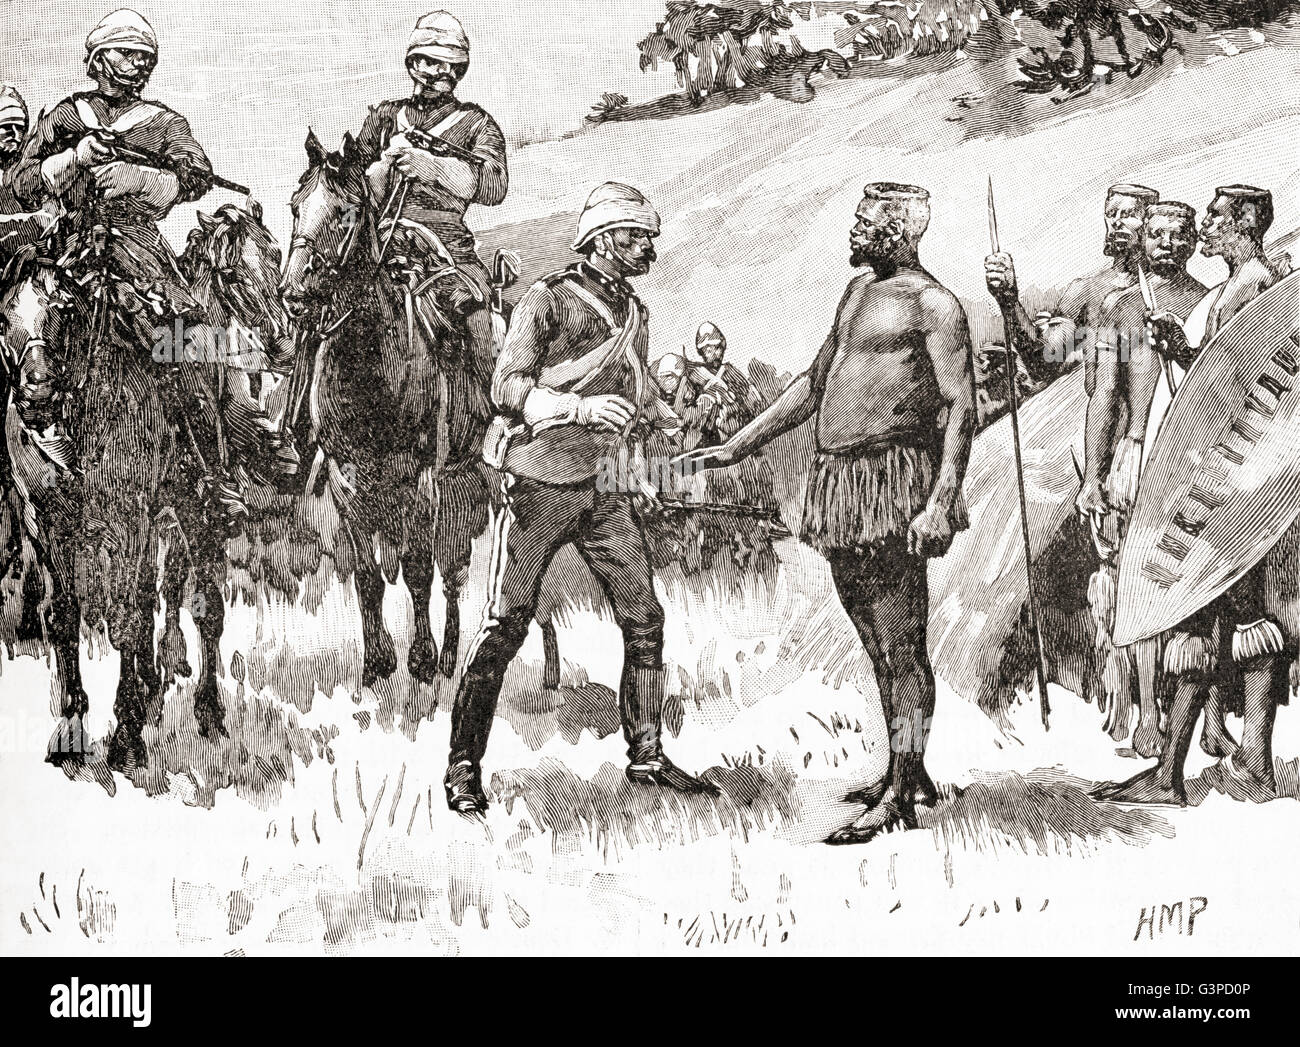 The surrender of Cetewayo to the British at the end of the Anglo-Zulu War, 1879. Cetshwayo kaMpande, c. 1826 – 1884.   King of the Zulu Kingdom  and its leader during the Anglo-Zulu War of 1879. Stock Photo